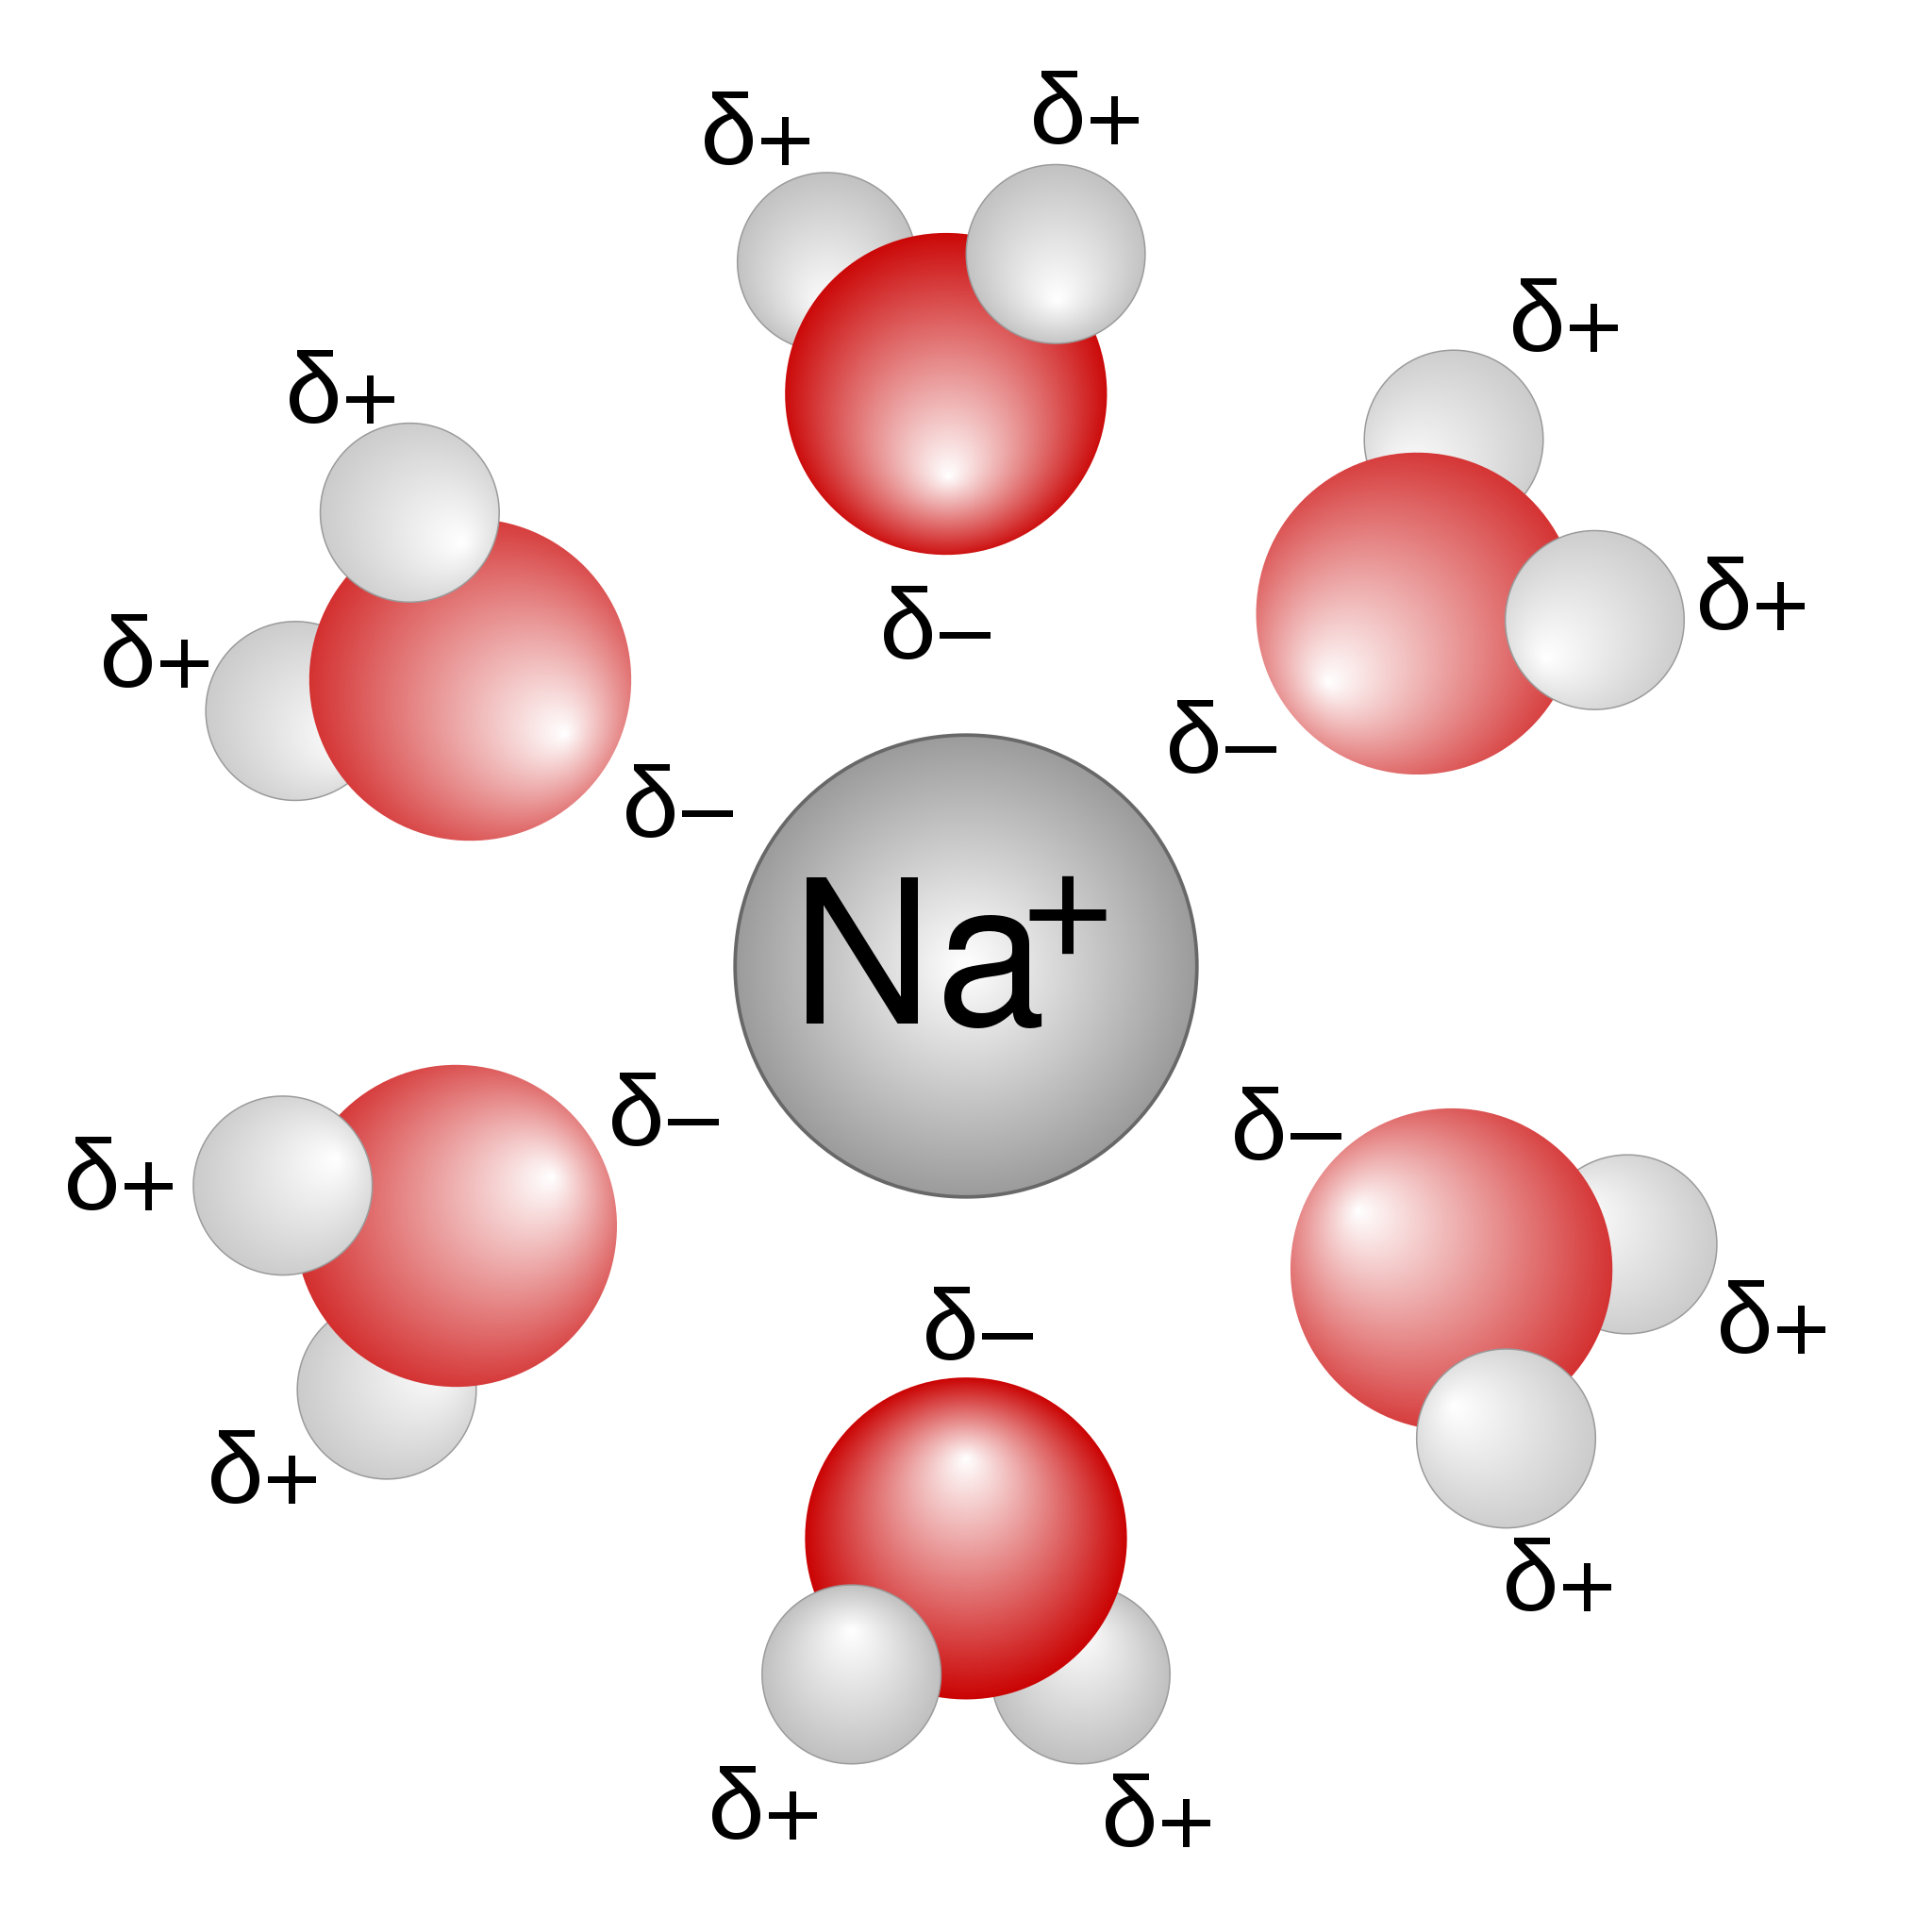 Diagram with a sodium atom at the center and six water molecules surrounding the sodium atom. The center atom is gray, labeled "Na+". The surrounding molecules each have one red oxygen and two gray hydrogen atoms with the Greek symbol delta labeling each atom; the hydrogen atoms each have delta+ while the oxygen atoms which all face the center sodium atom each have delta-.